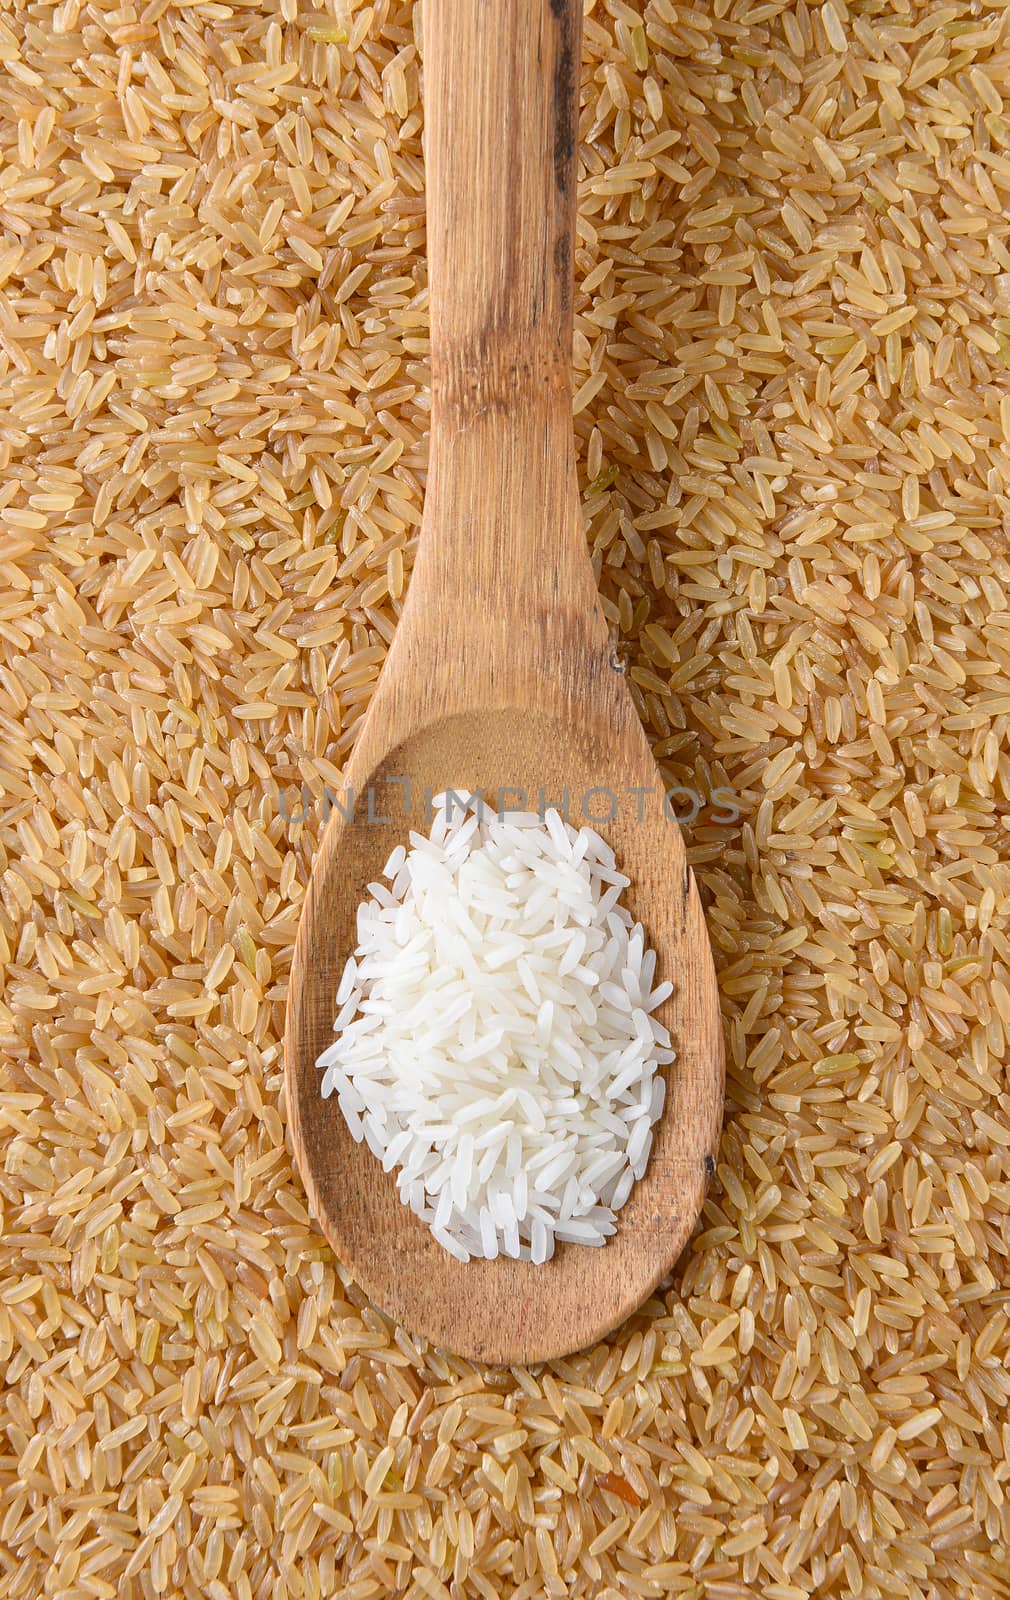 Top view of a wooden spoon with uncooked white rice. The spoon is on a background of brown rice filling the frame.